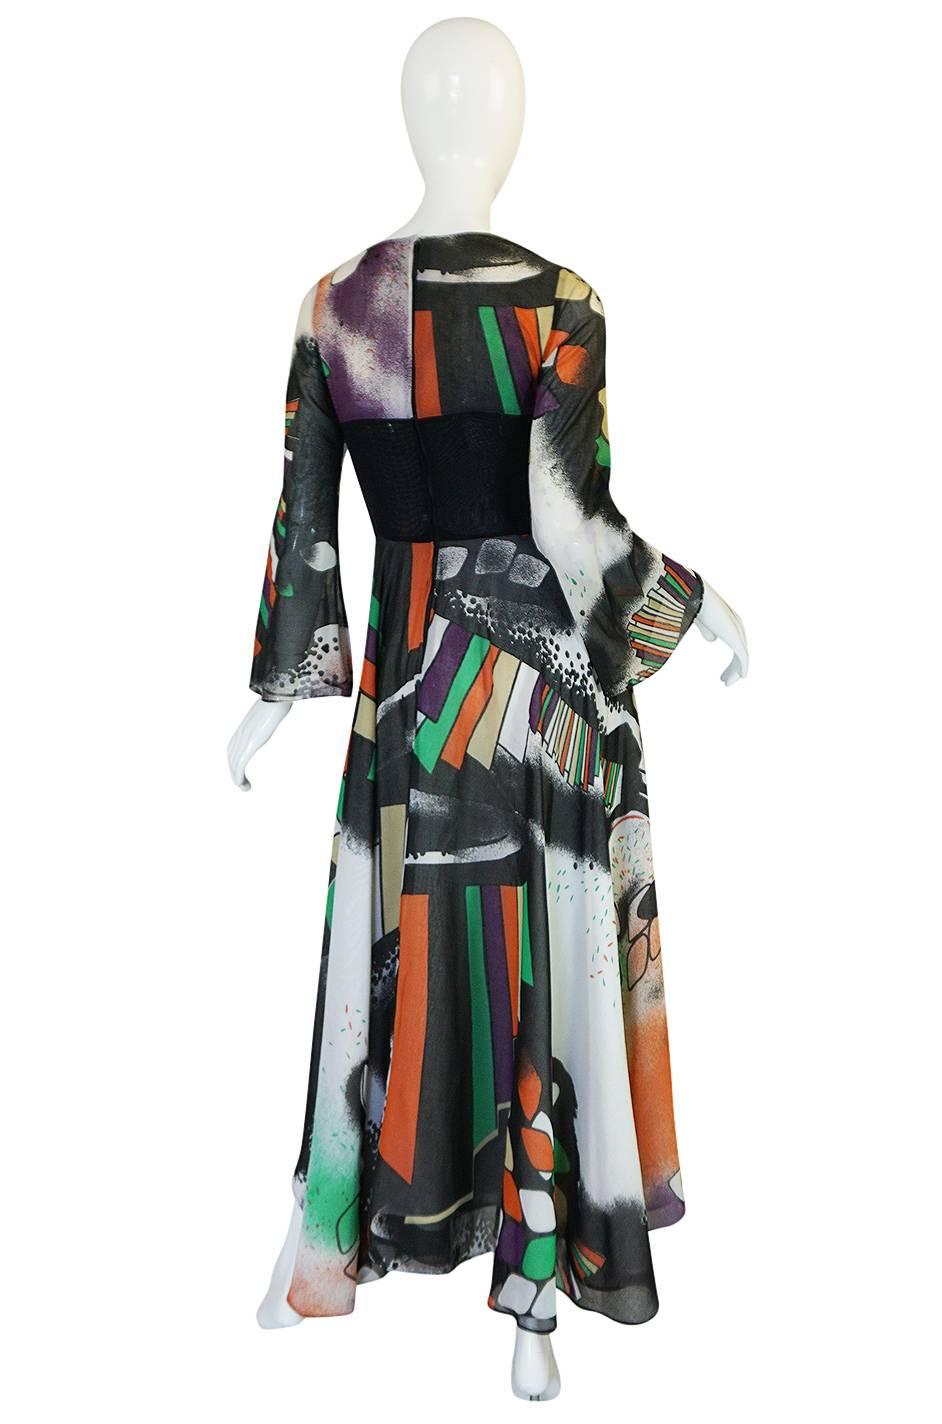 This particular version of the Thea Porter label was only produced between October 1971-March 1972 and this gown was part of the 1971 collection. It is a beautiful example of her work and I am pleased to share that its twin was part of the 2015 Thea